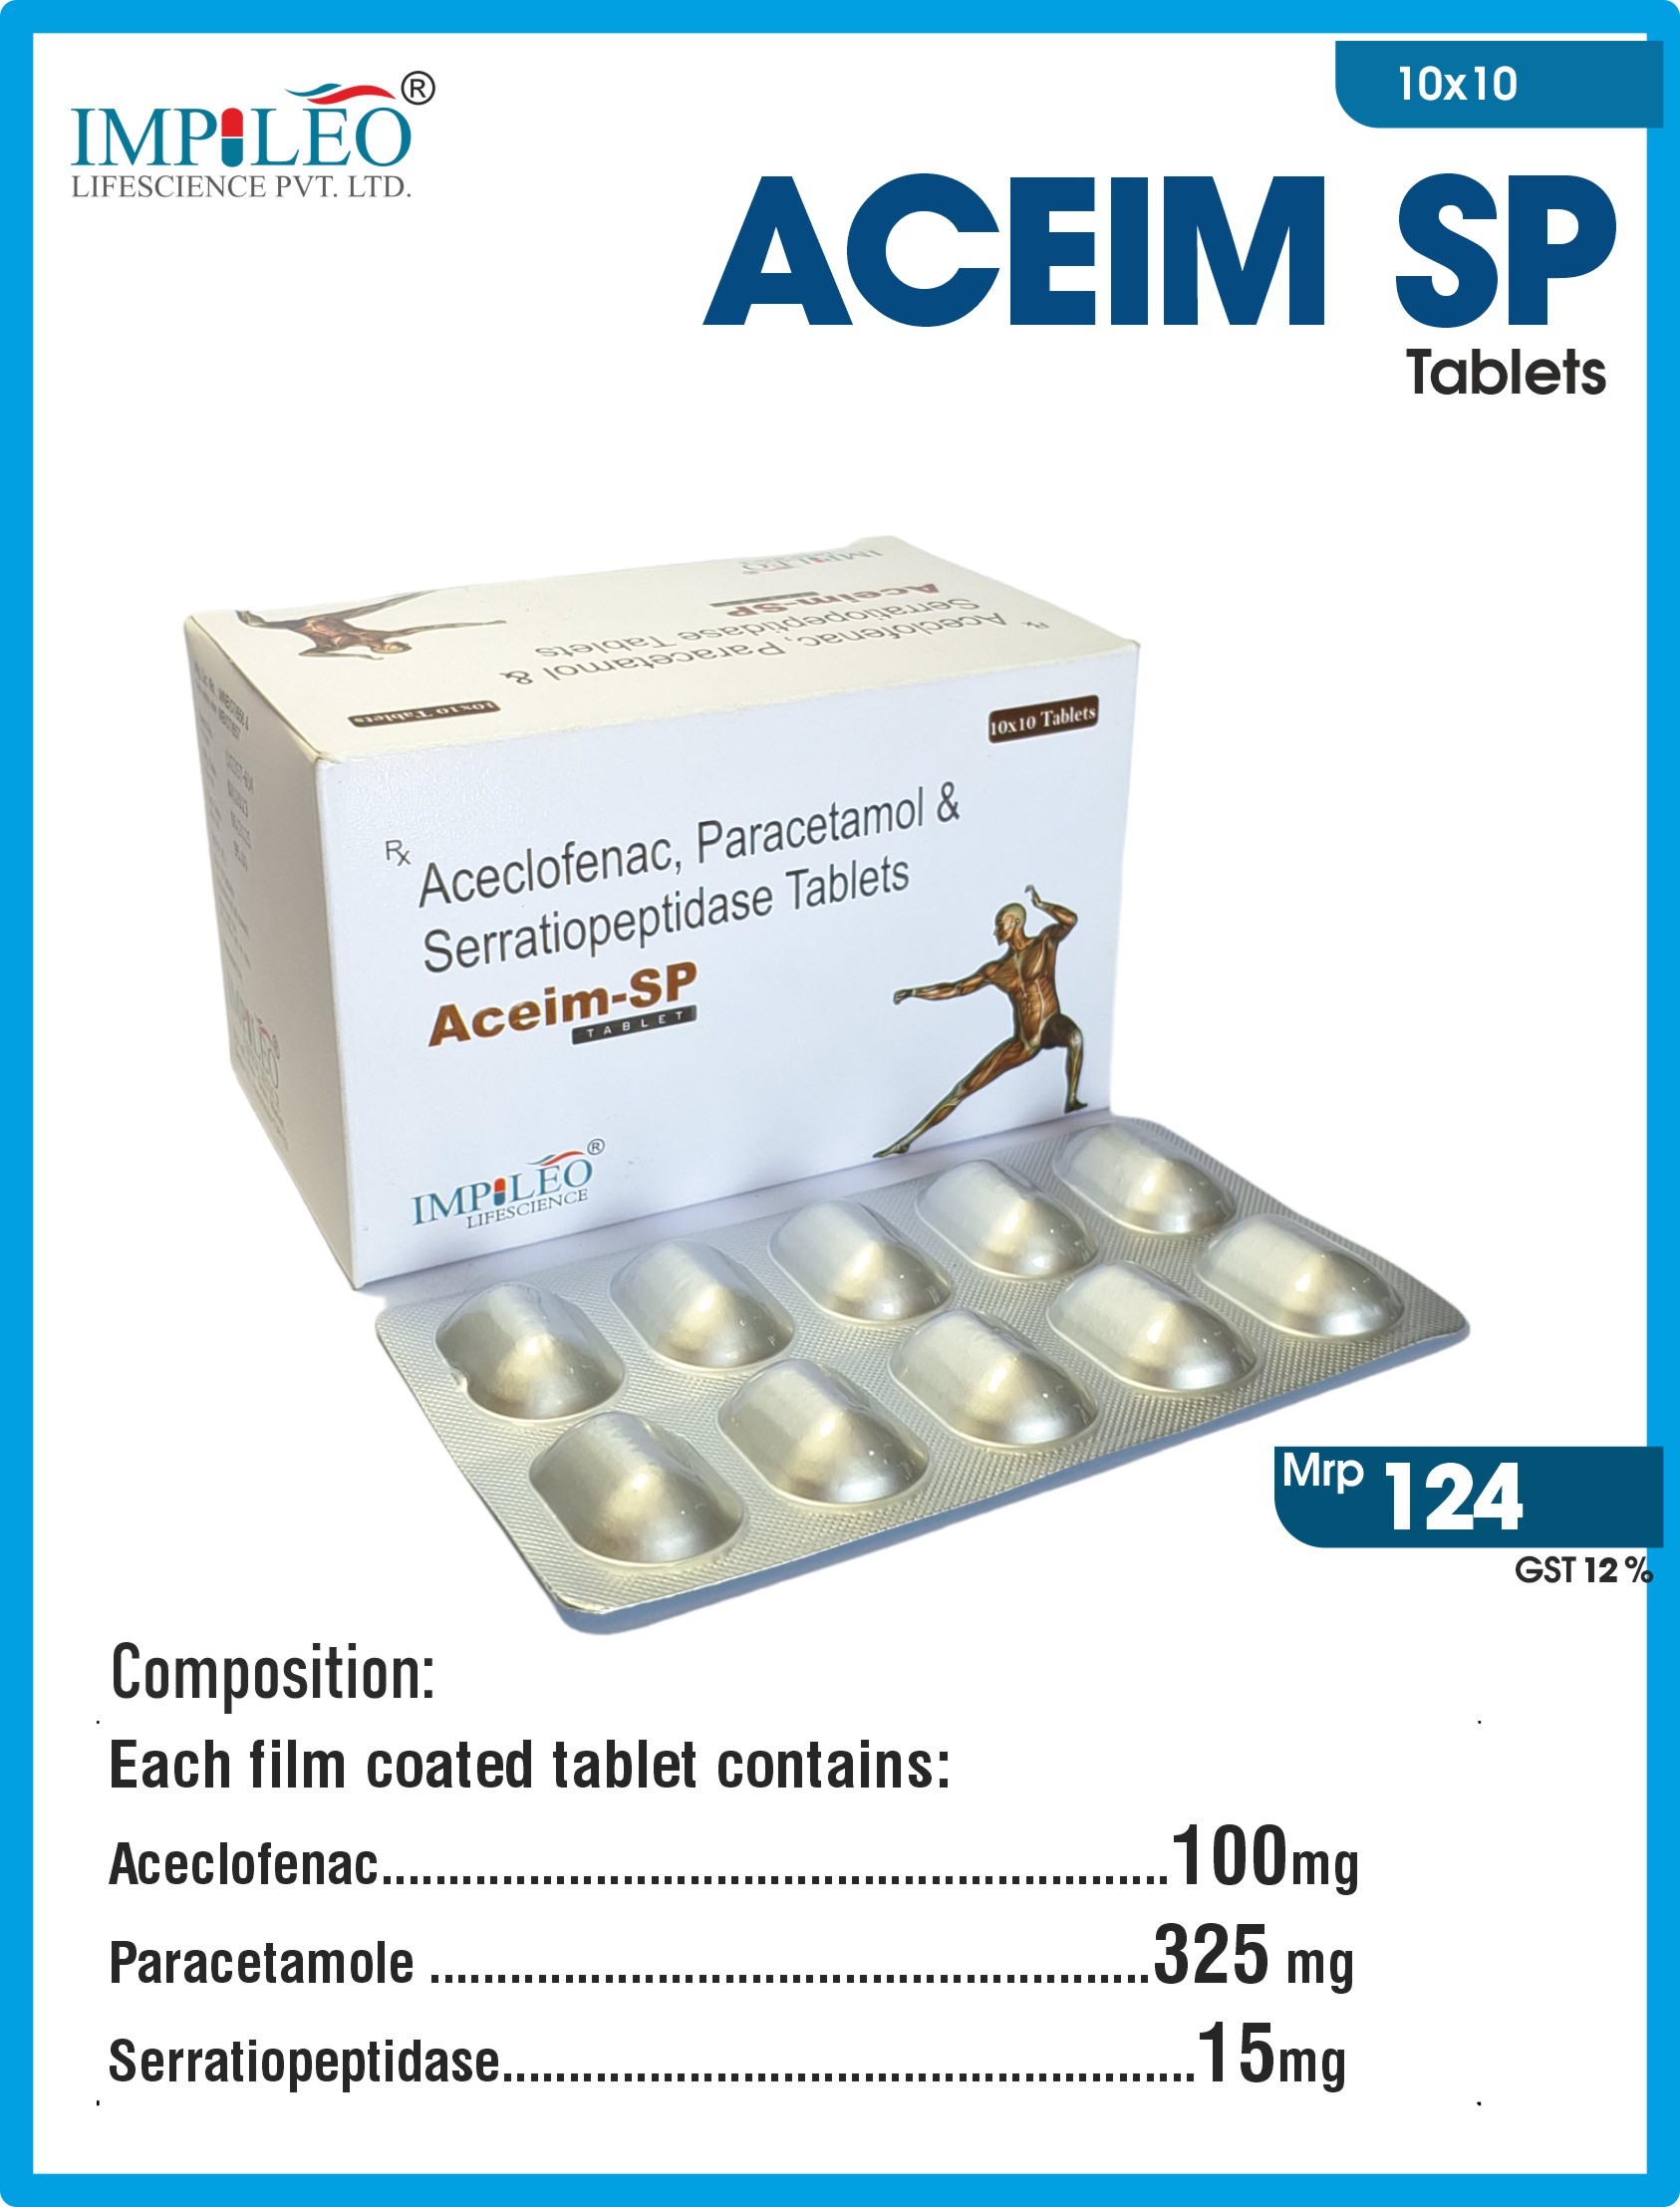 ACEIM-SP Tablets : Trusted Third-Party Manufacturing in Chandigarh Offers Top-Quality Aceclofenac, Paracetamol, and Serratiopeptidase Formulation